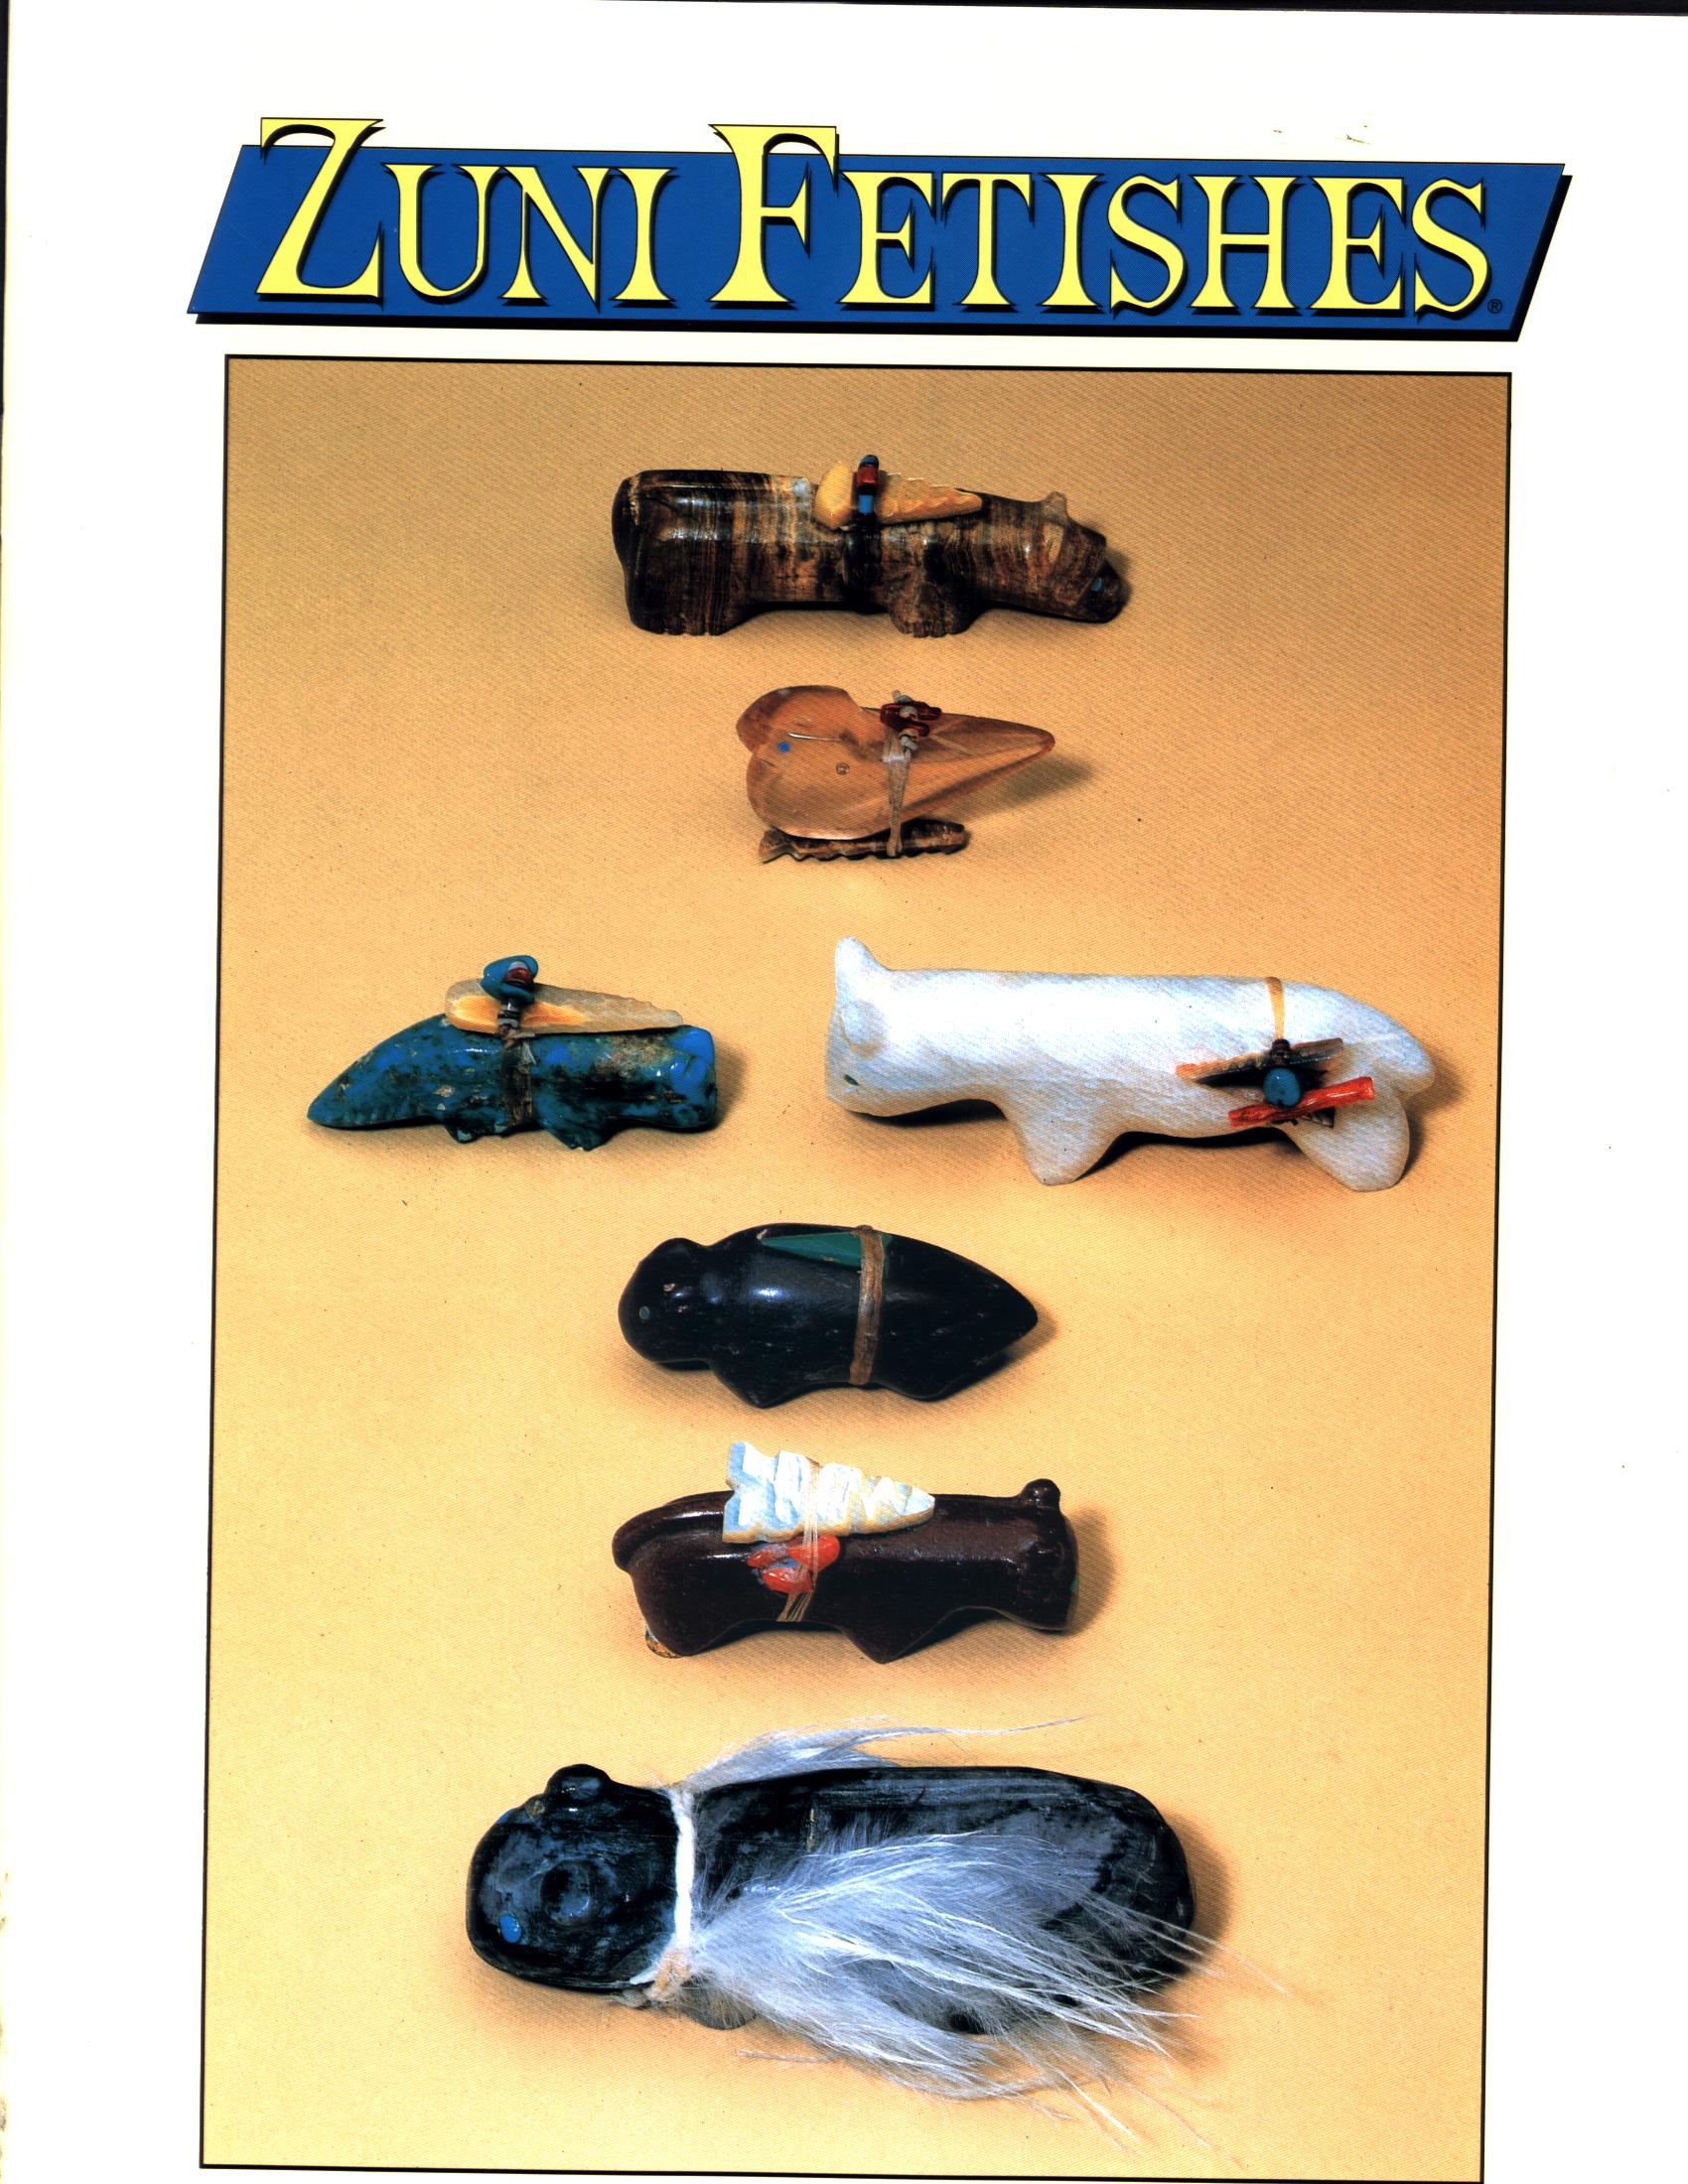 ZUNI FETISHES: expanded edition (NM).